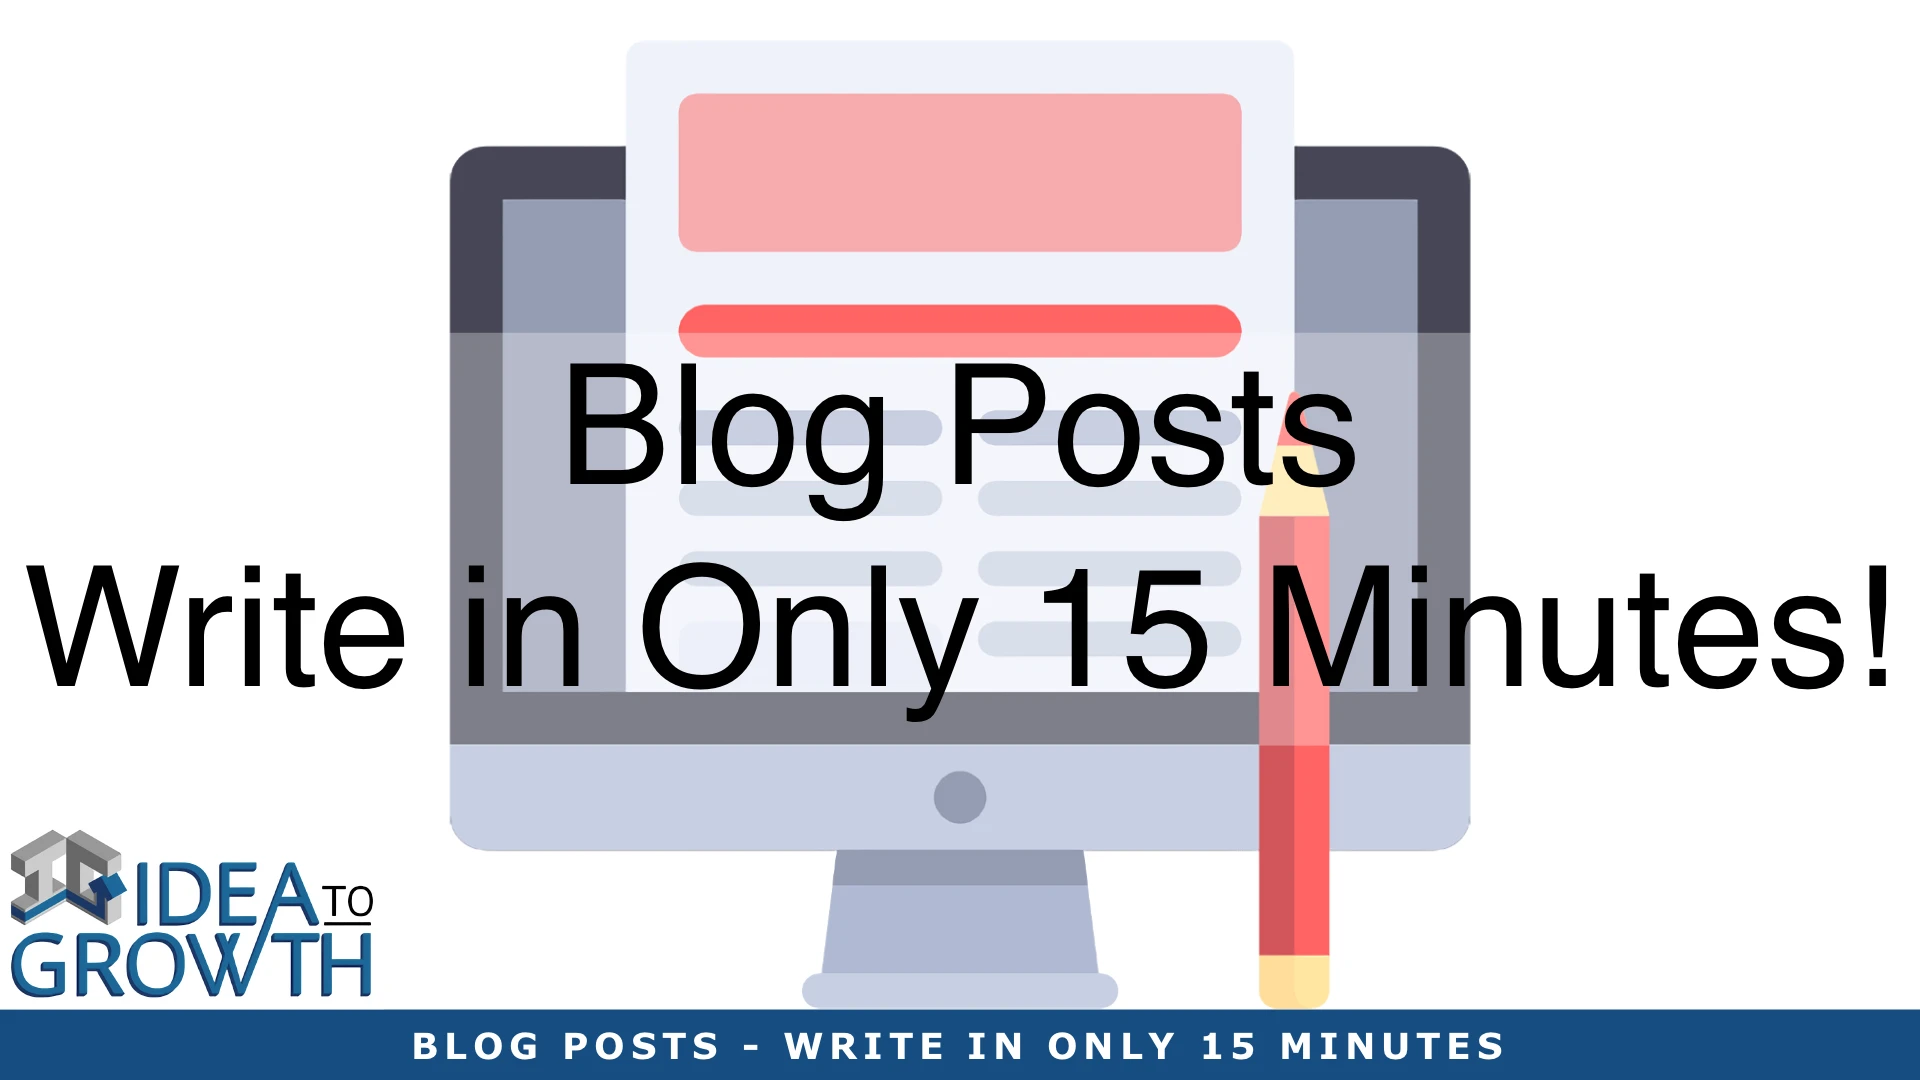 BLOG POSTS - WRITE IN ONLY 15 MINUTES